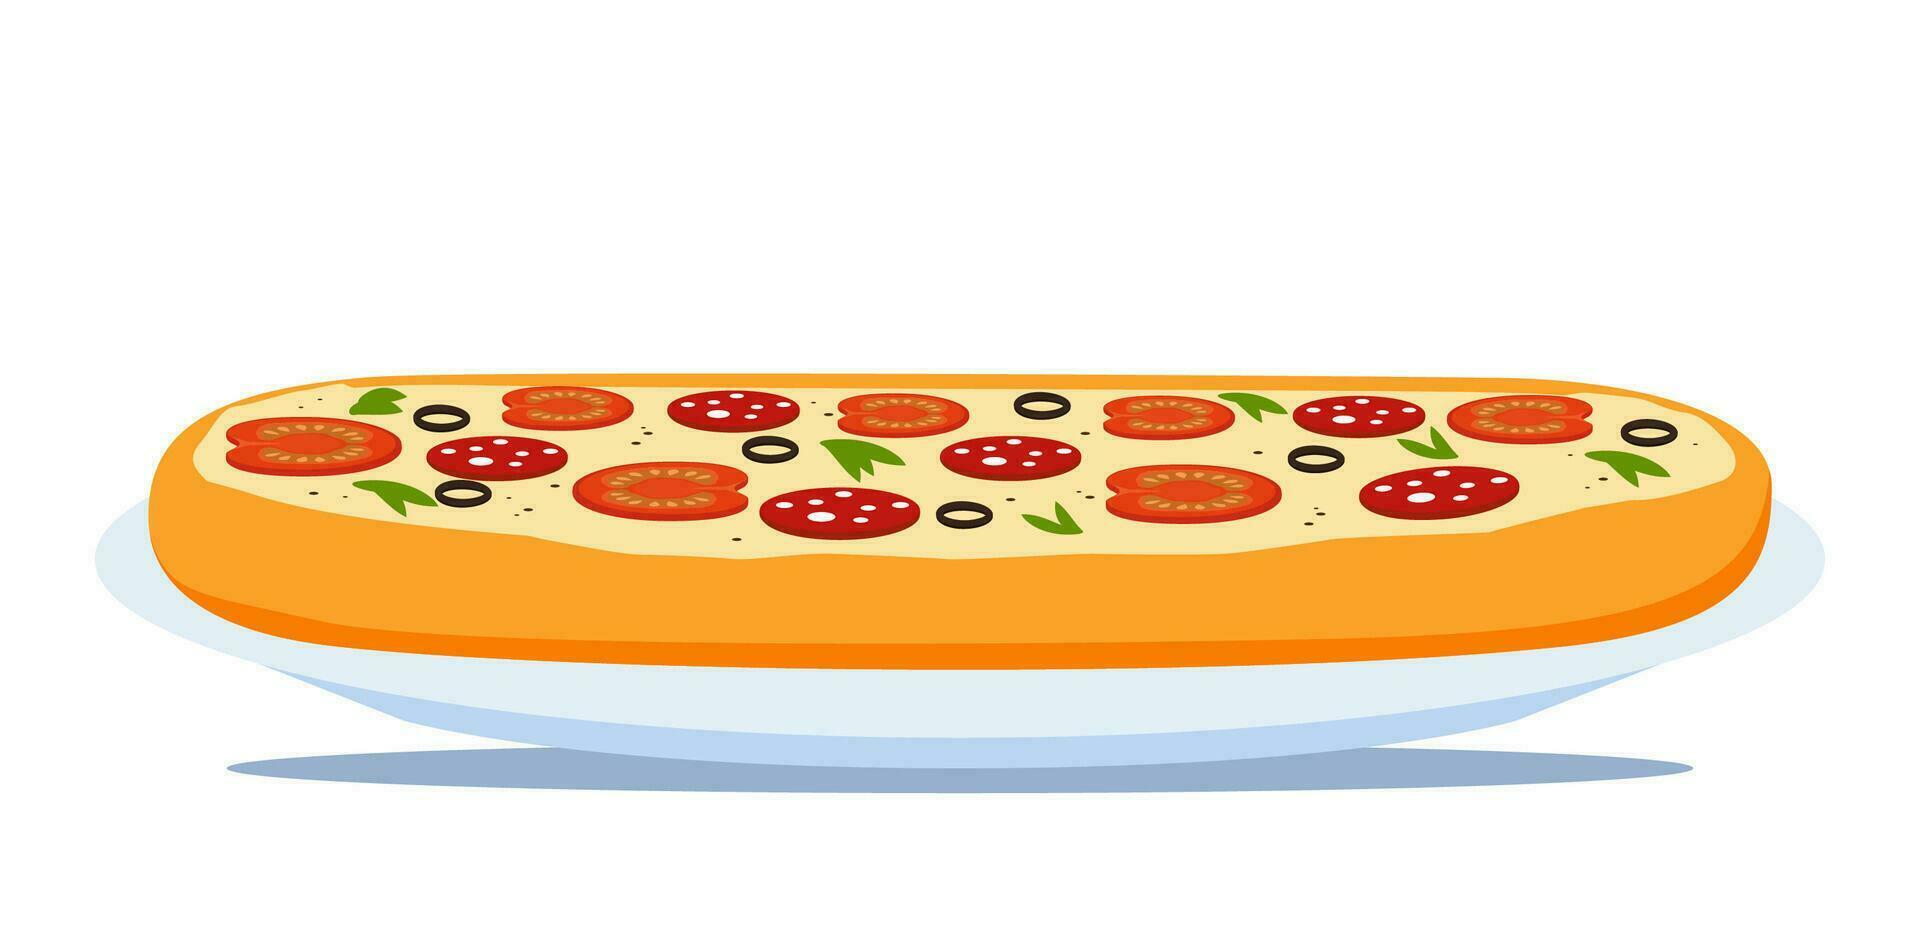 Side view pizza with various ingredients. Whole pizza on plate. Italian pizza. Italian traditional food. Vector illustration.